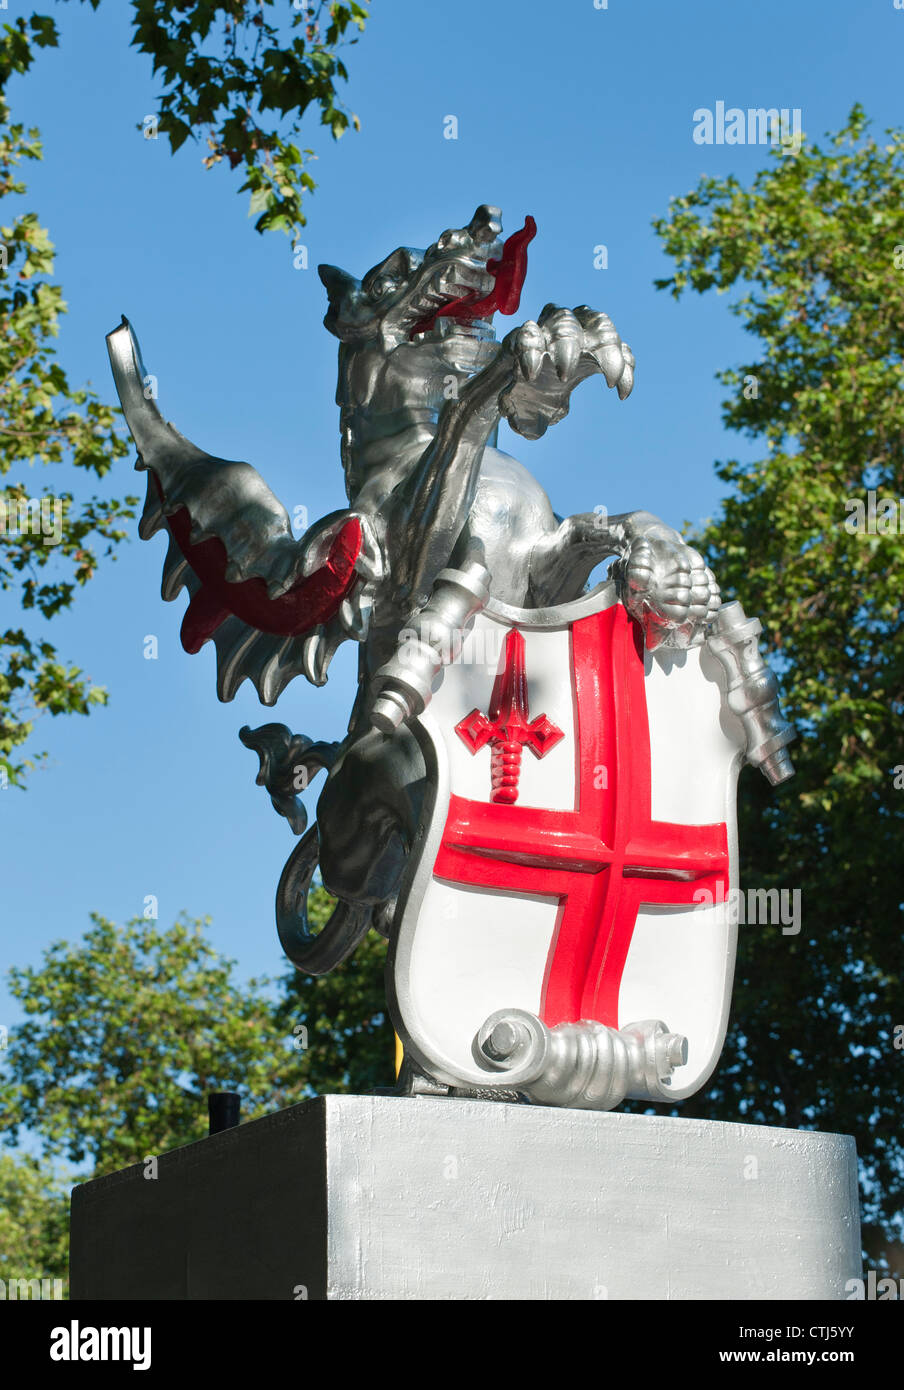 Dragon representing part of the armorial bearings of the Corporation of the City of London marks the boundary of the city. Stock Photo